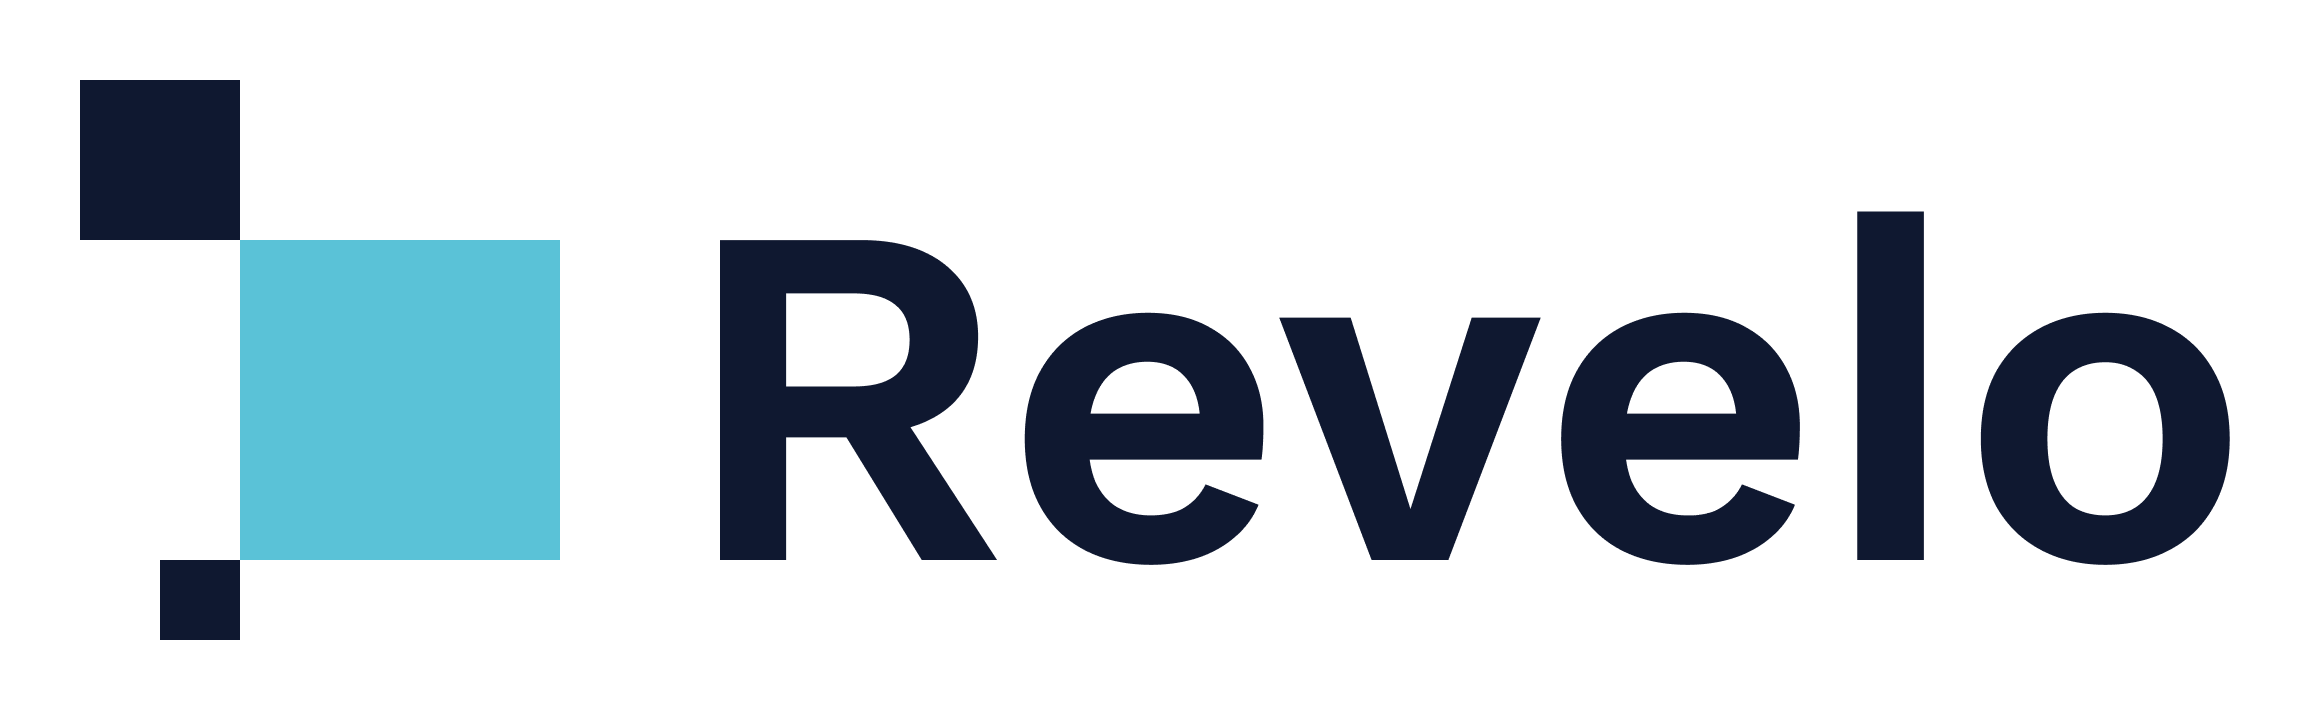 Revelo - Online recruiting marketplace that goes beyond the resume